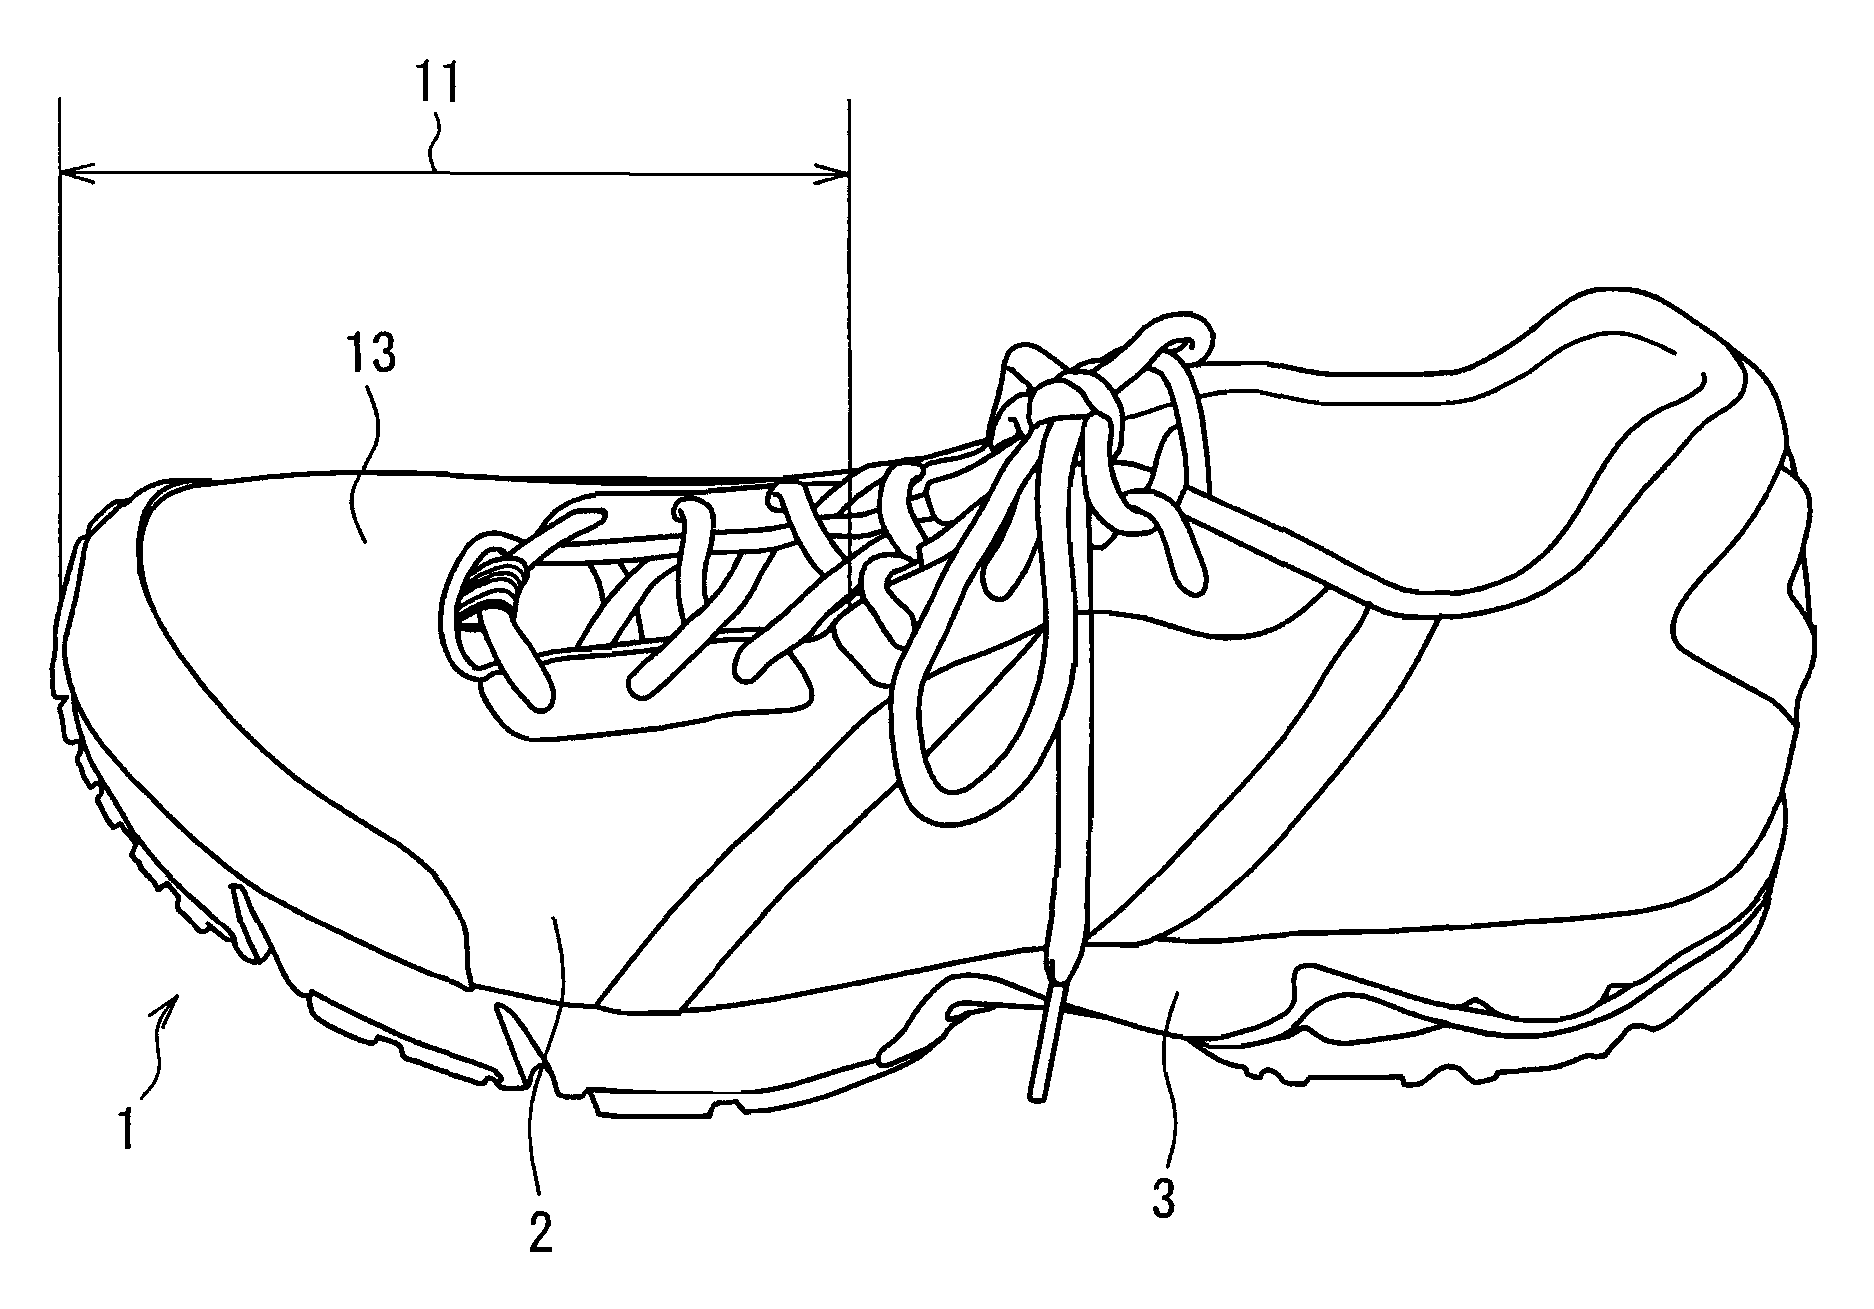 Shoe and method of manufacturing the same